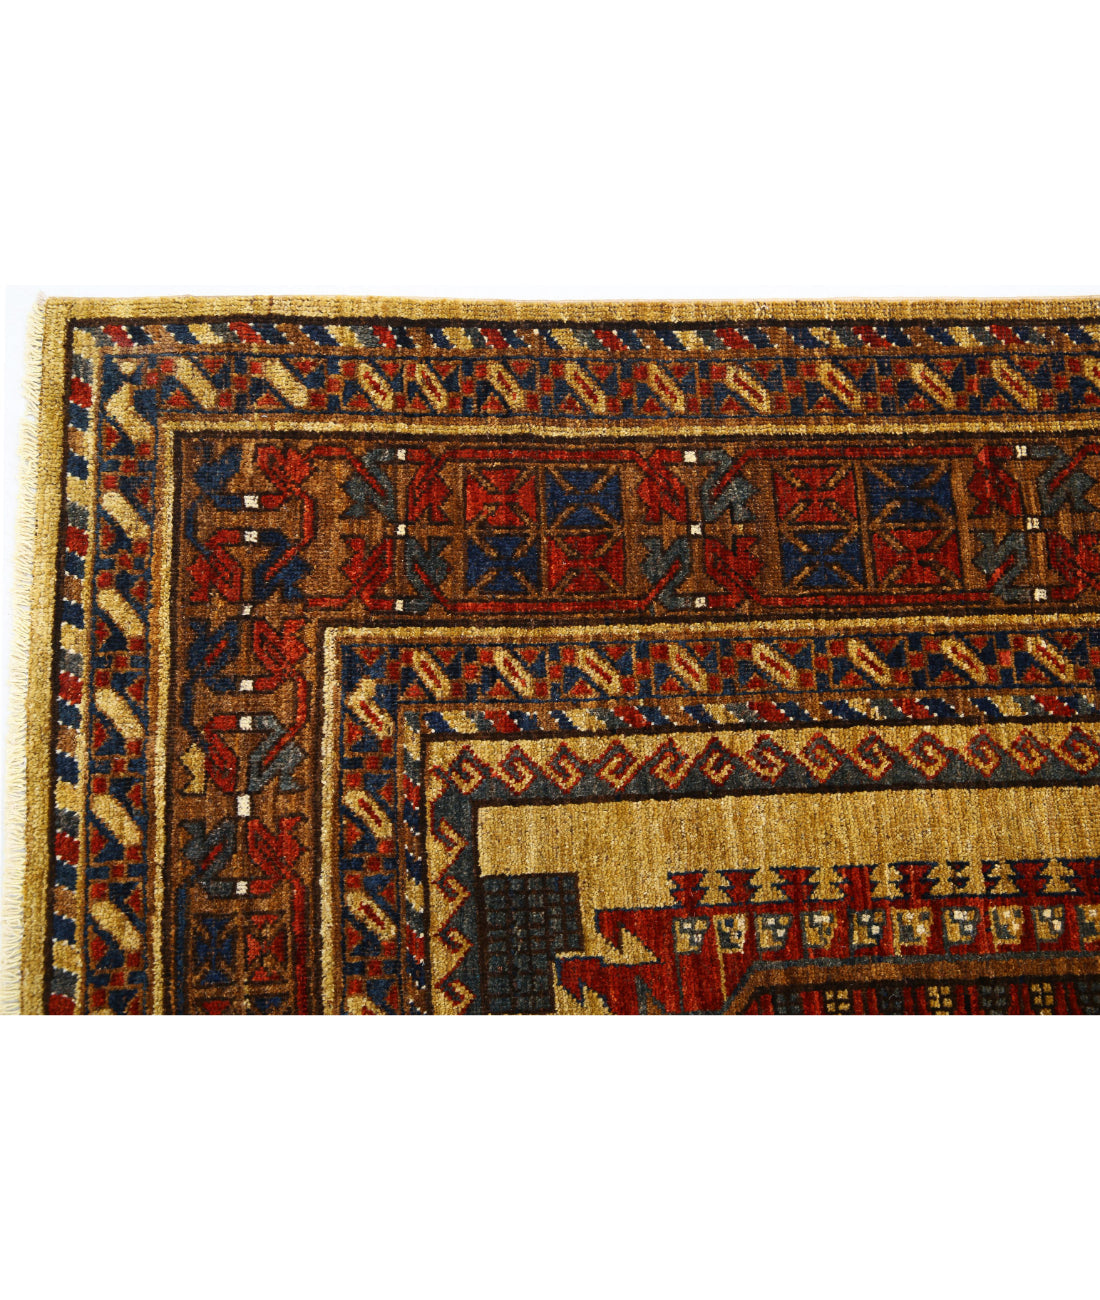 Hand Knotted Nomadic Caucasian Humna Wool Rug - 6'2'' x 9'6'' 6'2'' x 9'6'' (185 X 285) / Gold / Red